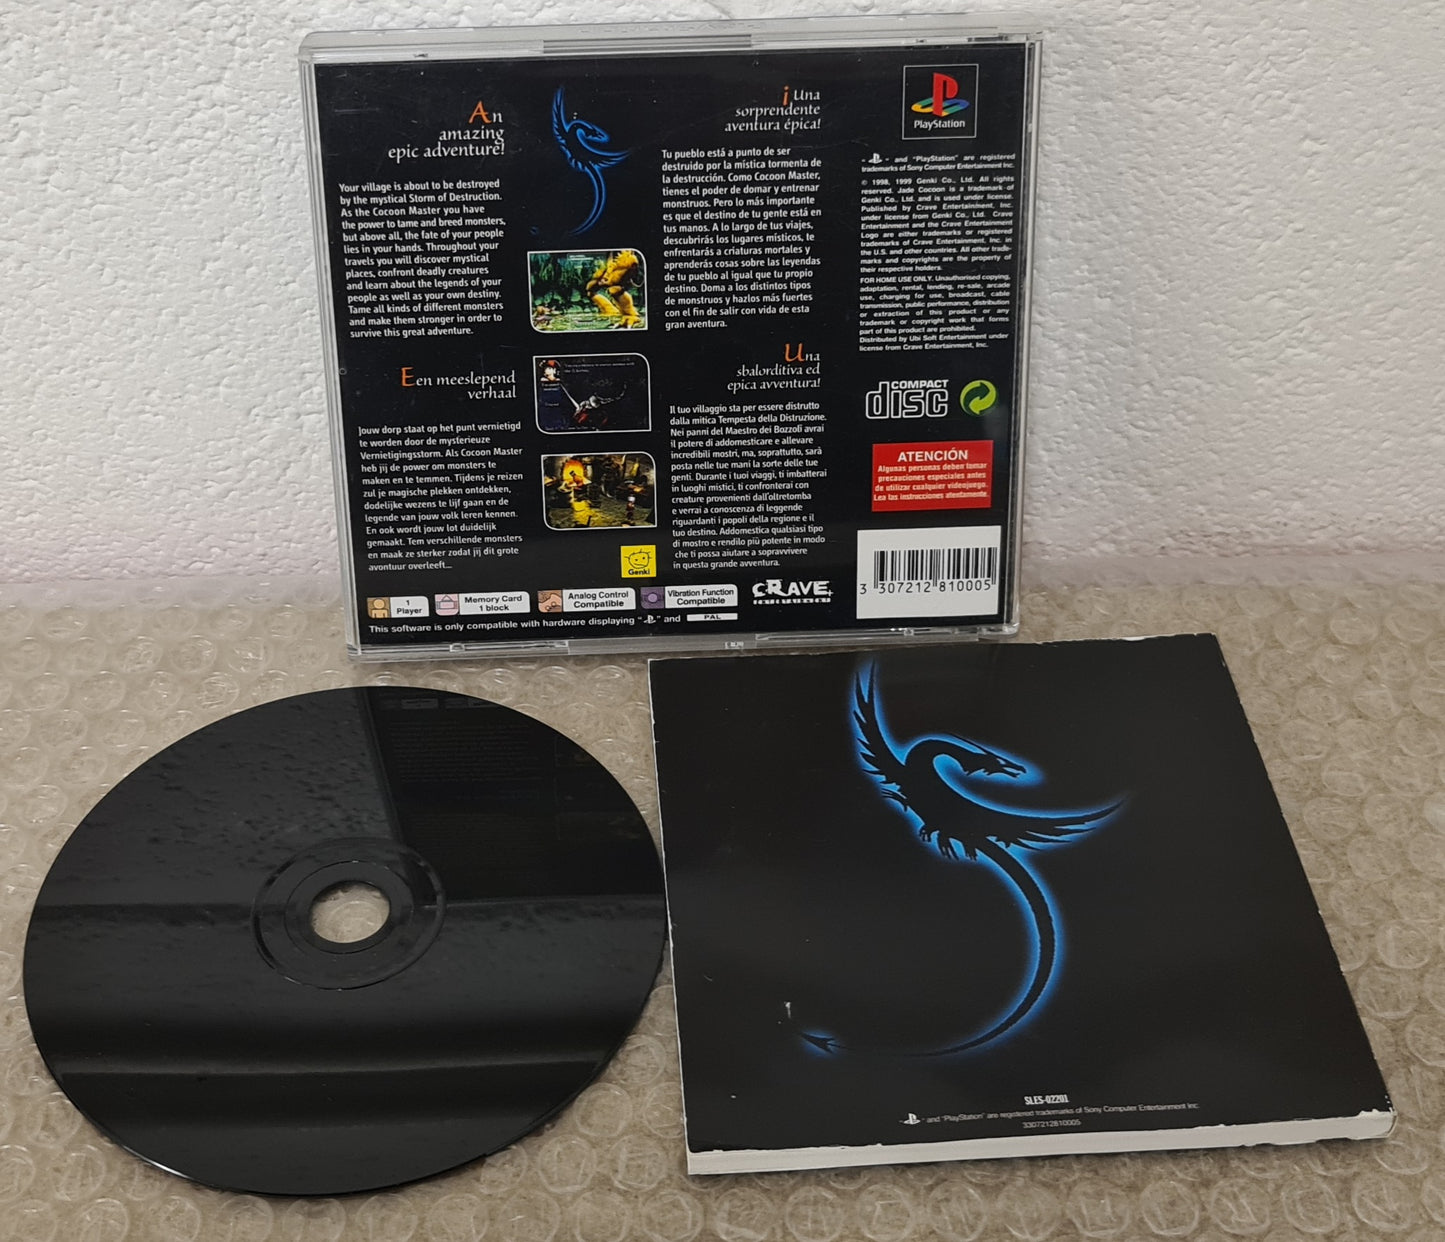 Jade Cocoon the Story of Tamamayu Ubisoft Exclusive Sony Playstation 1 (PS1) Game